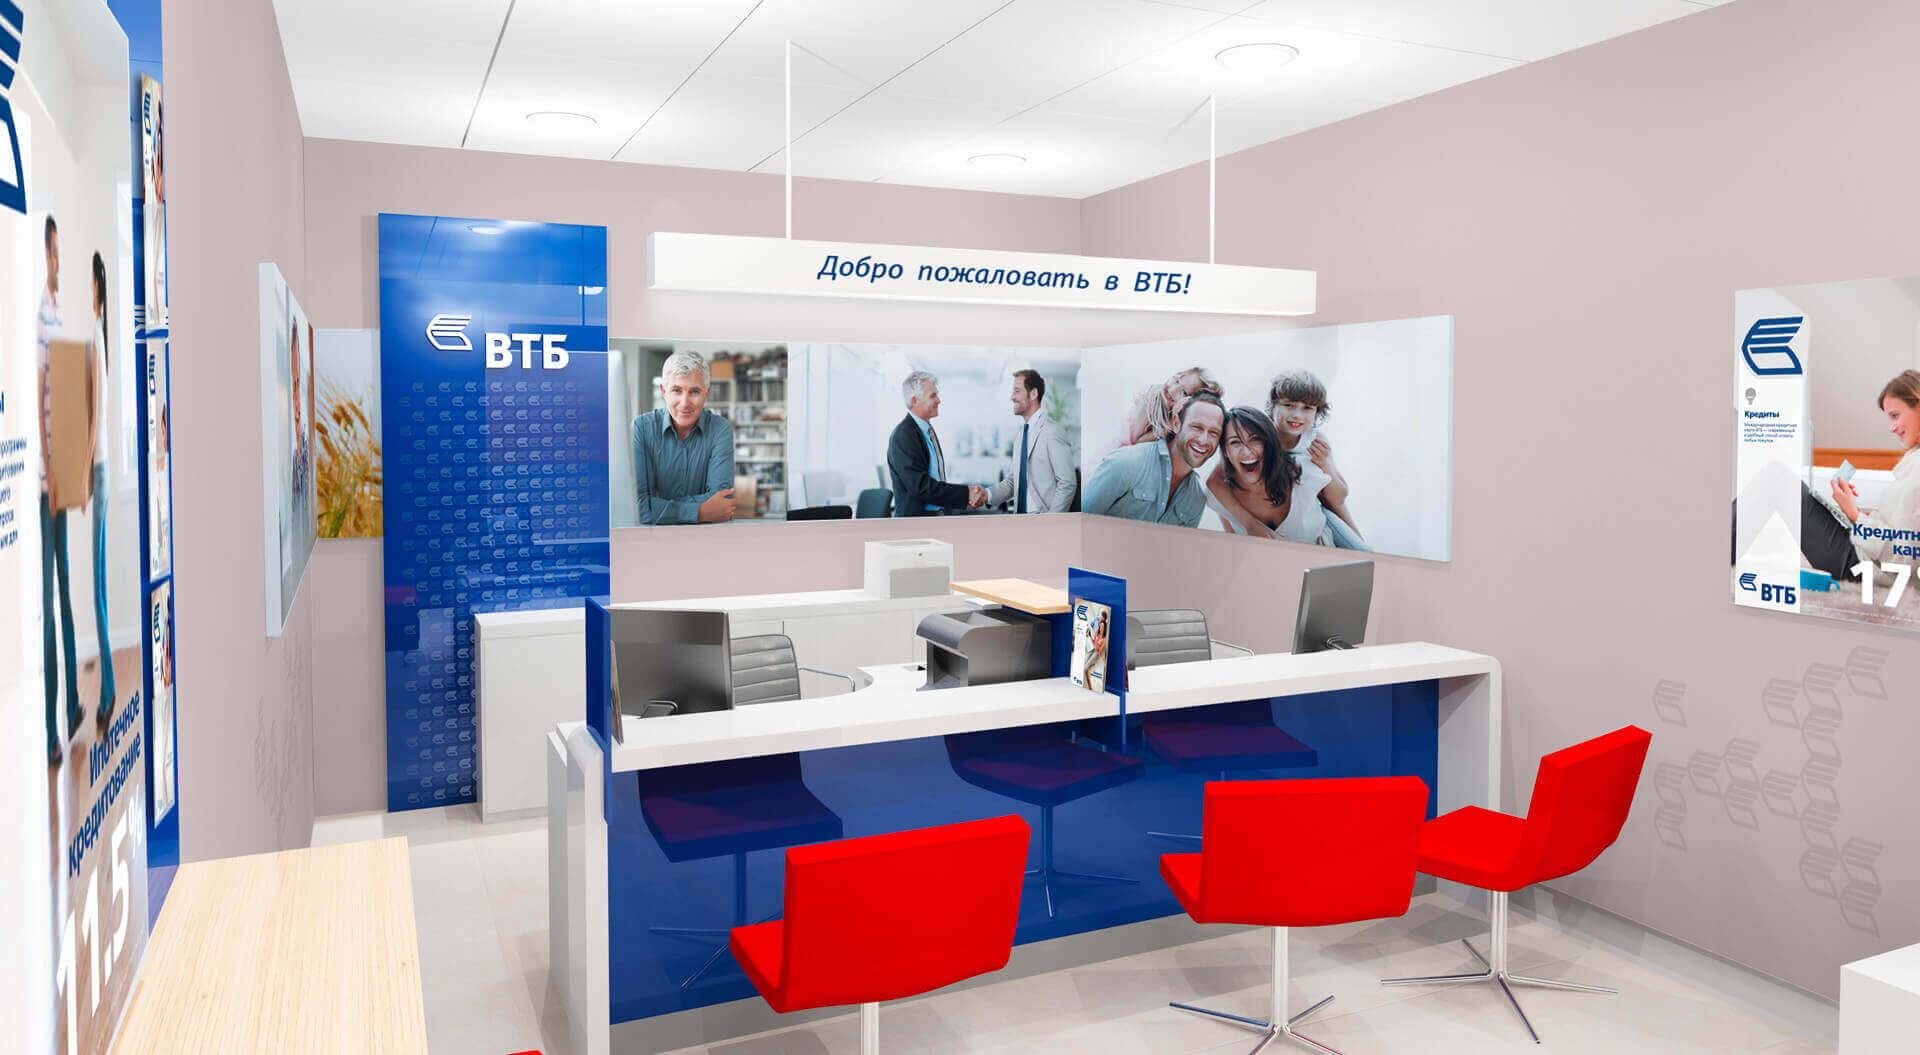 VTB Bank express bank branch design with semi private consultation desks